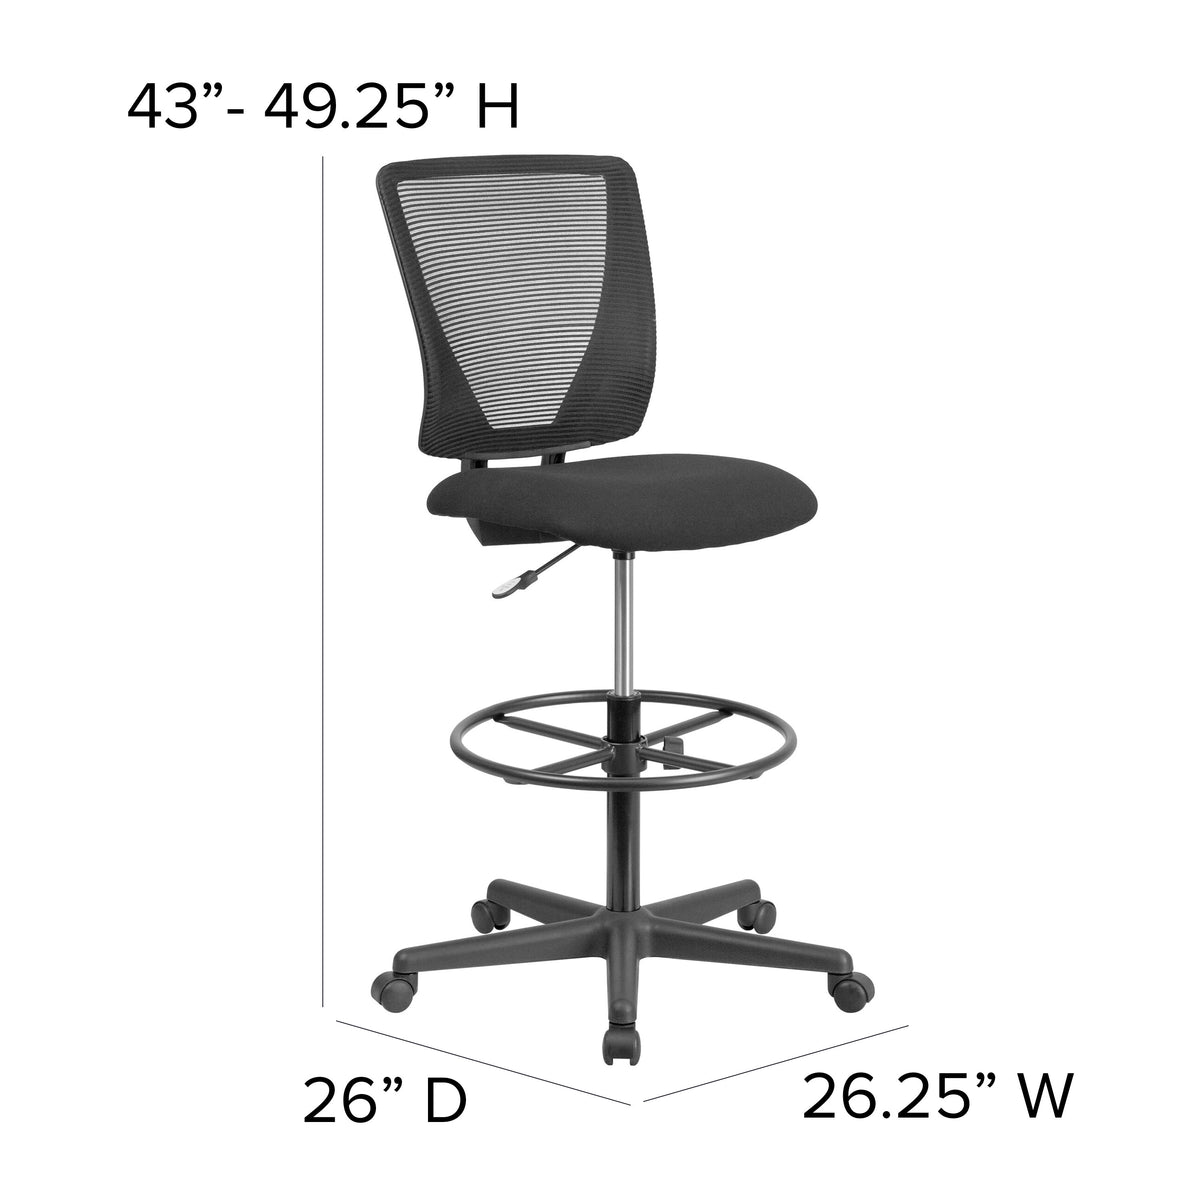 Mid-Back Mesh Drafting Chair with Black Fabric Seat and Adjustable Foot Ring